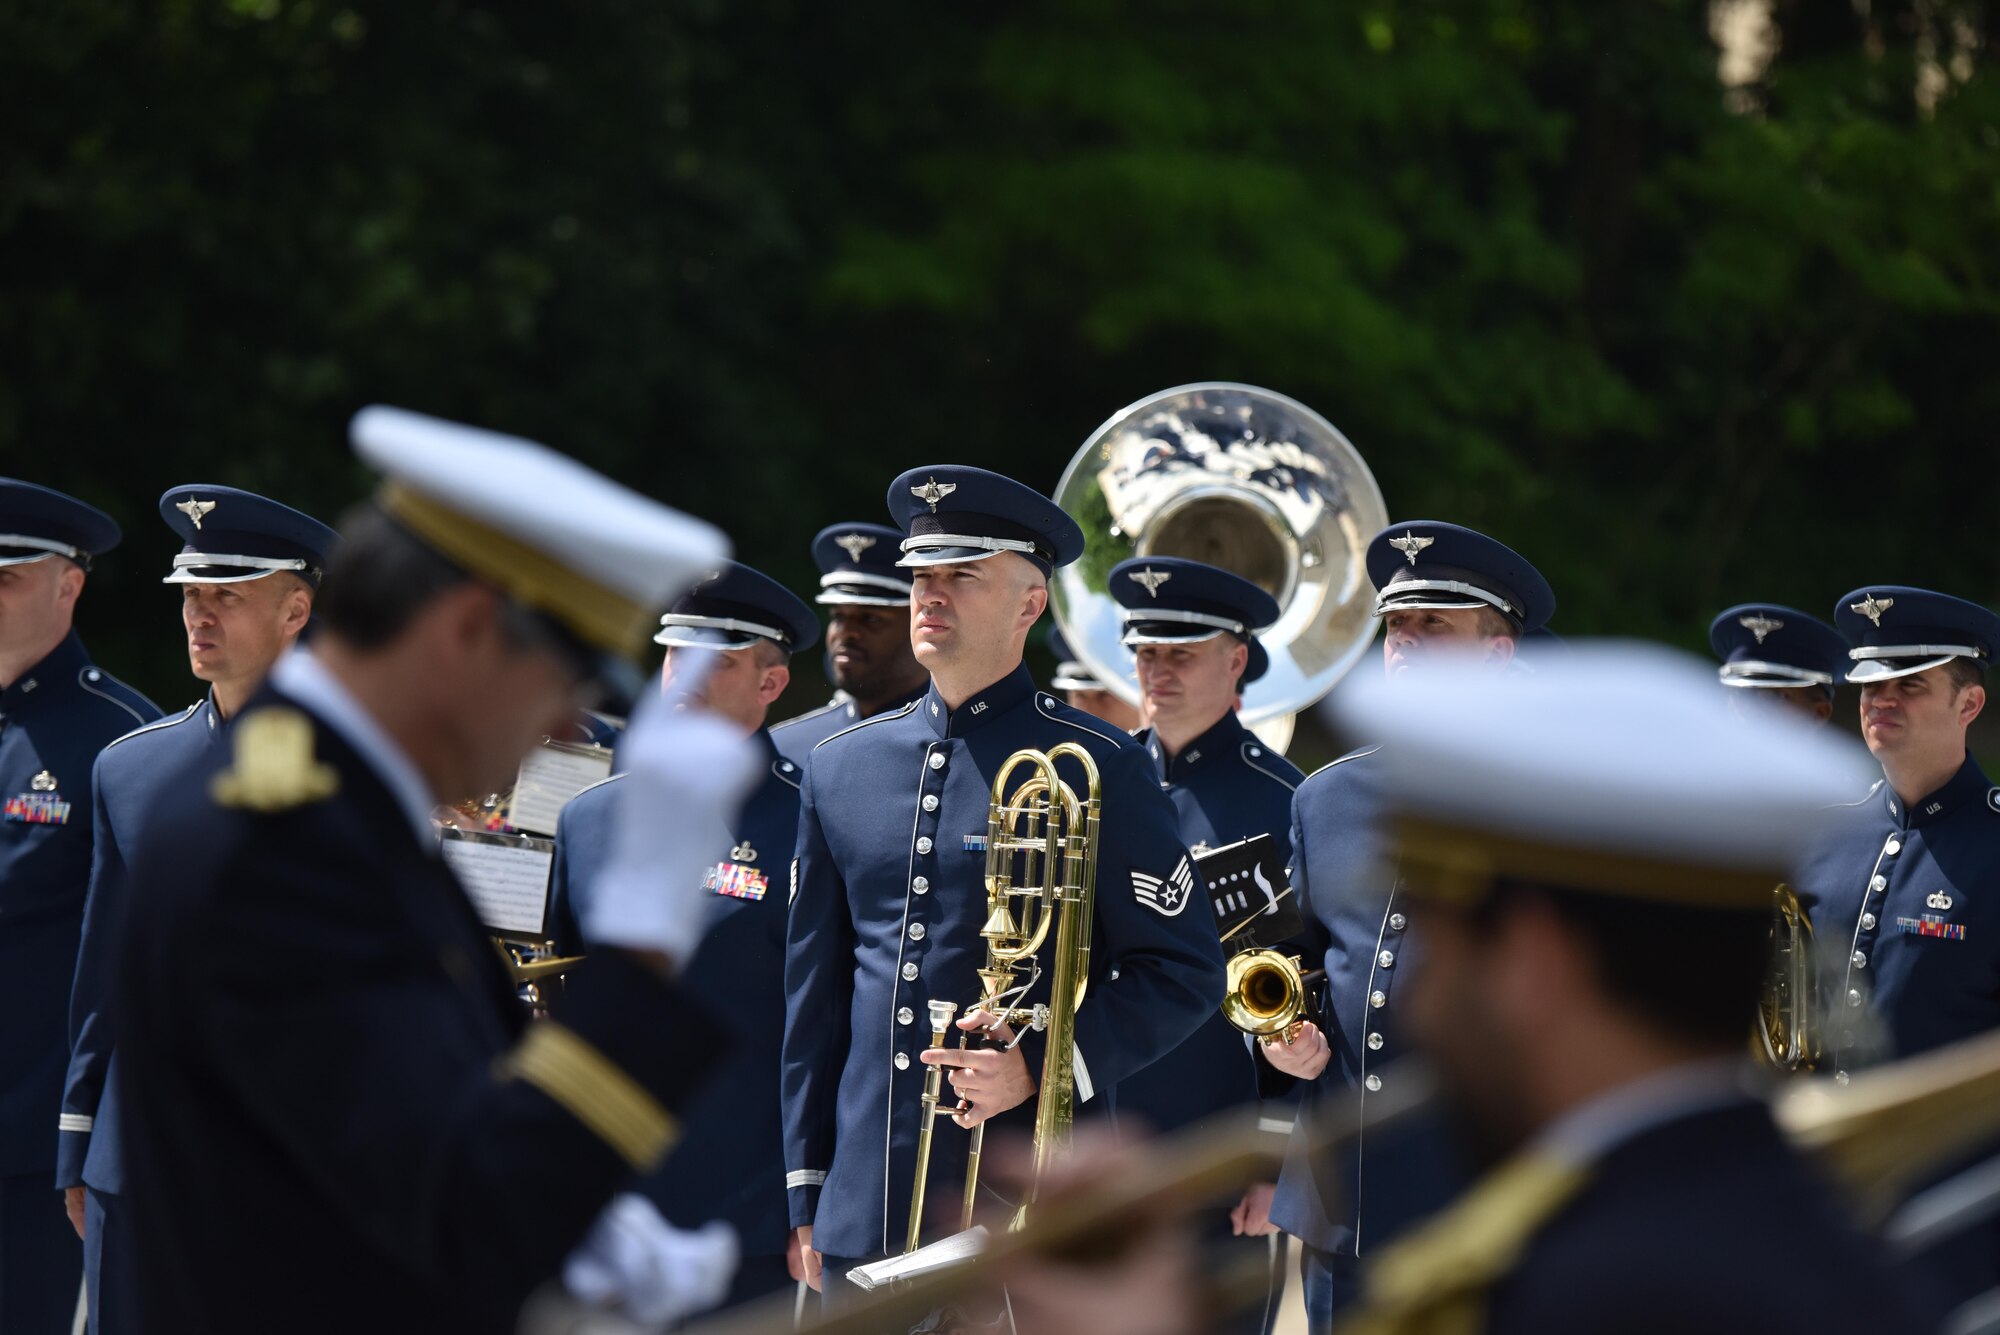 PARIS – Airmen from the U.S. Air Forces in Europe Band stand at attention as a French military band plays ceremonial music during a Memorial Day ceremony at the Lafayette Escadrille Memorial, in Marnes-la-Coquette, France, May 28, 2016. During the ceremony, French and American speakers honored the shared sacrifices of U.S. and French service members fighting for each other’s freedom and security in a relationship that began more than 240 years ago during the American Revolutionary War. (U.S. Air Force photo by Senior Master Sgt. Brian Bahret/Released)